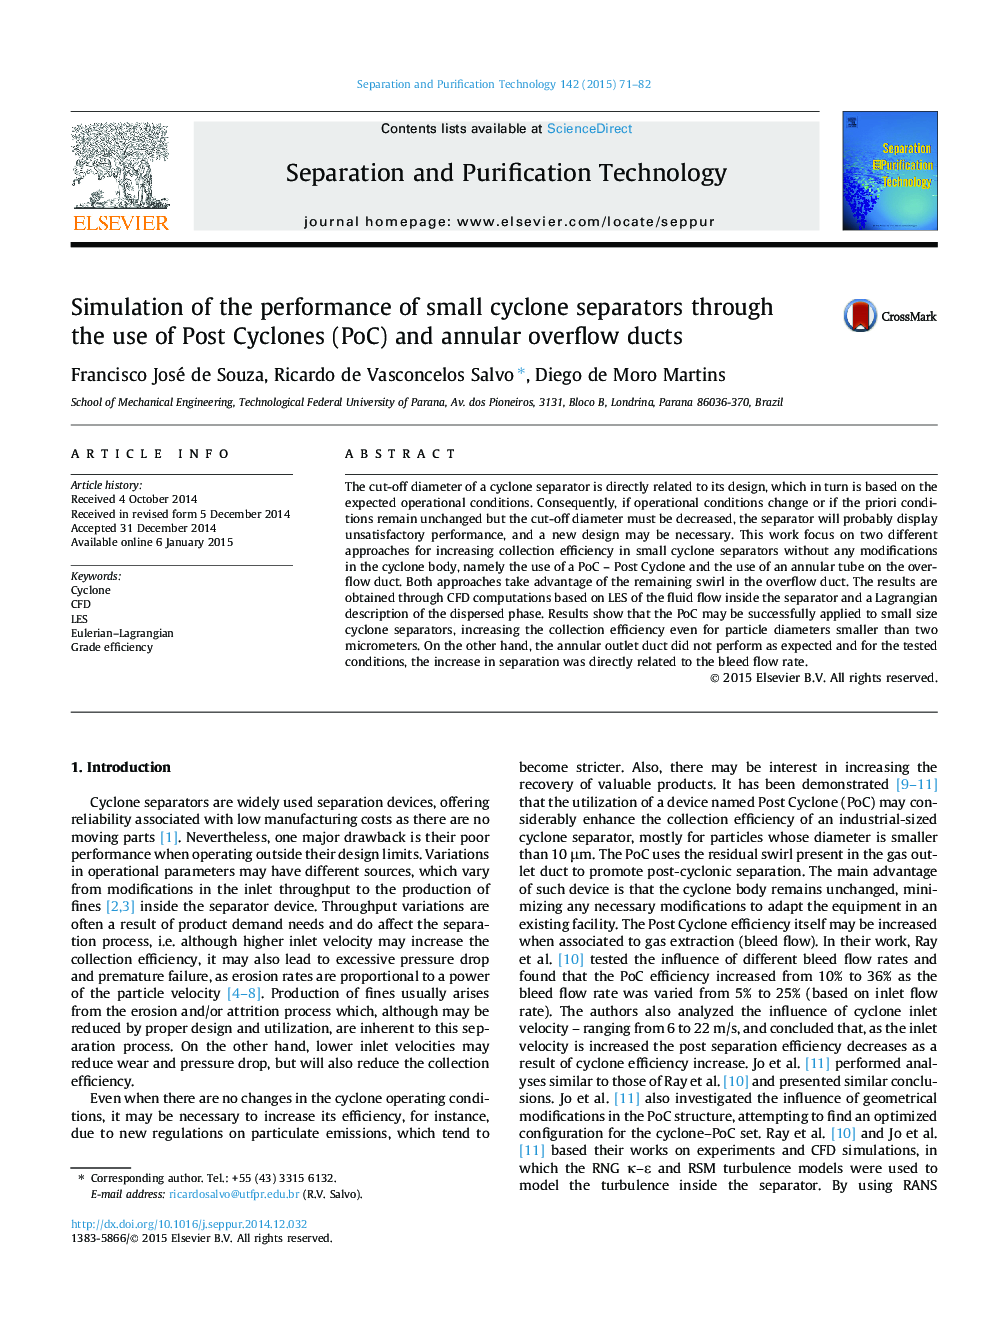 Simulation of the performance of small cyclone separators through the use of Post Cyclones (PoC) and annular overflow ducts